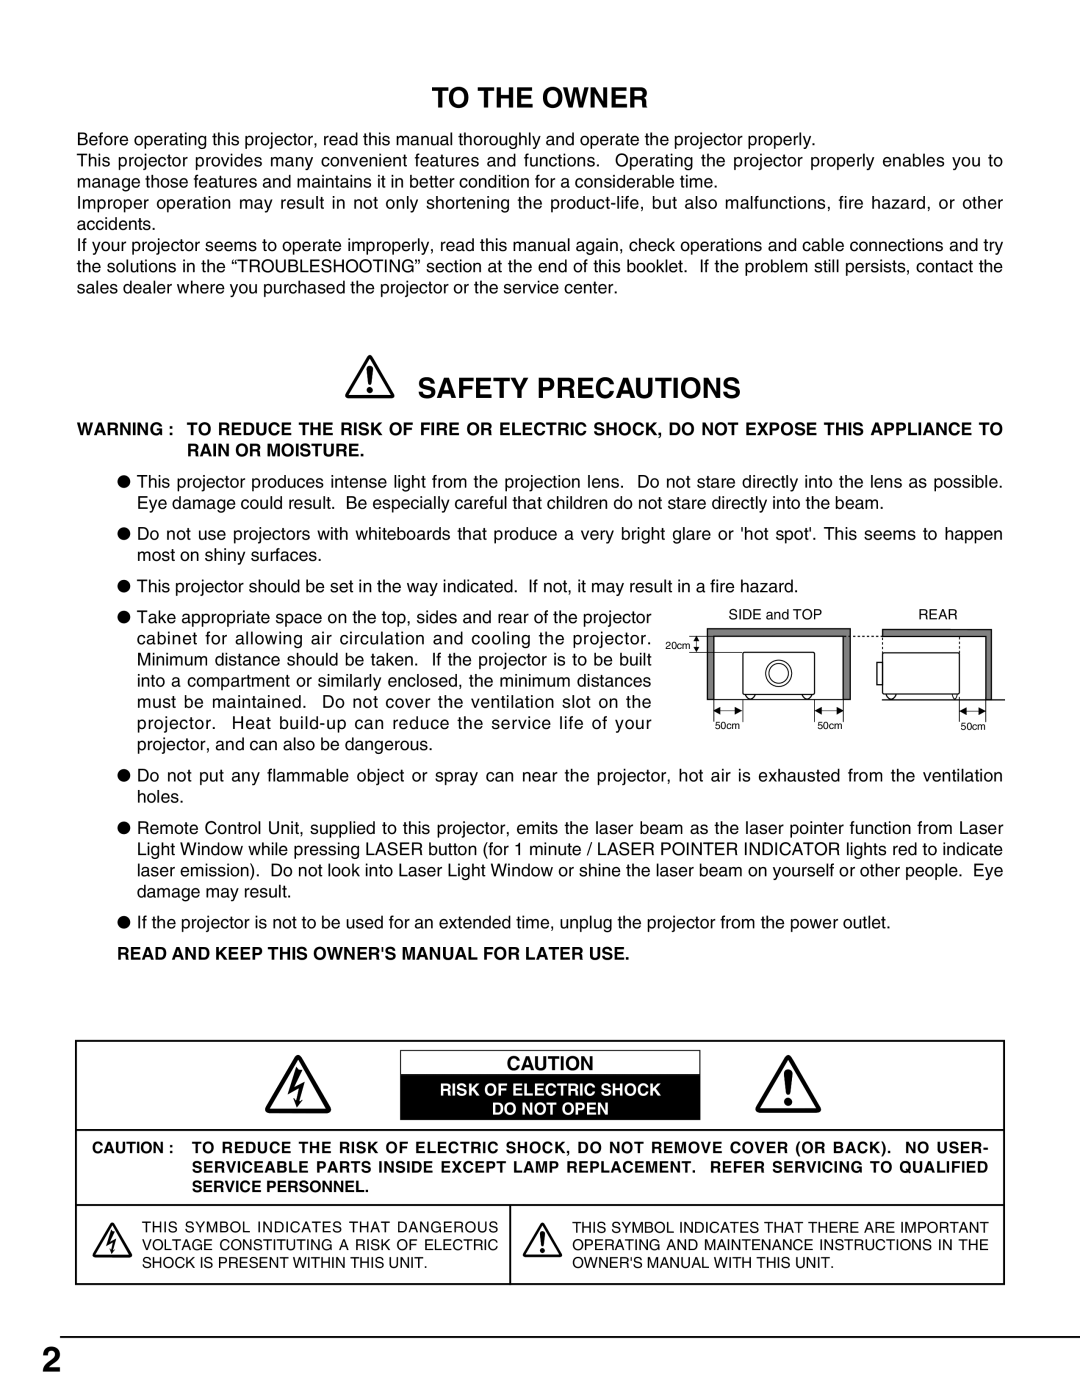 Sanyo PLC-XT11, PLC-XT16 owner manual To The Owner, Safety Precautions, Read And Keep This Owners Manual For Later Use 